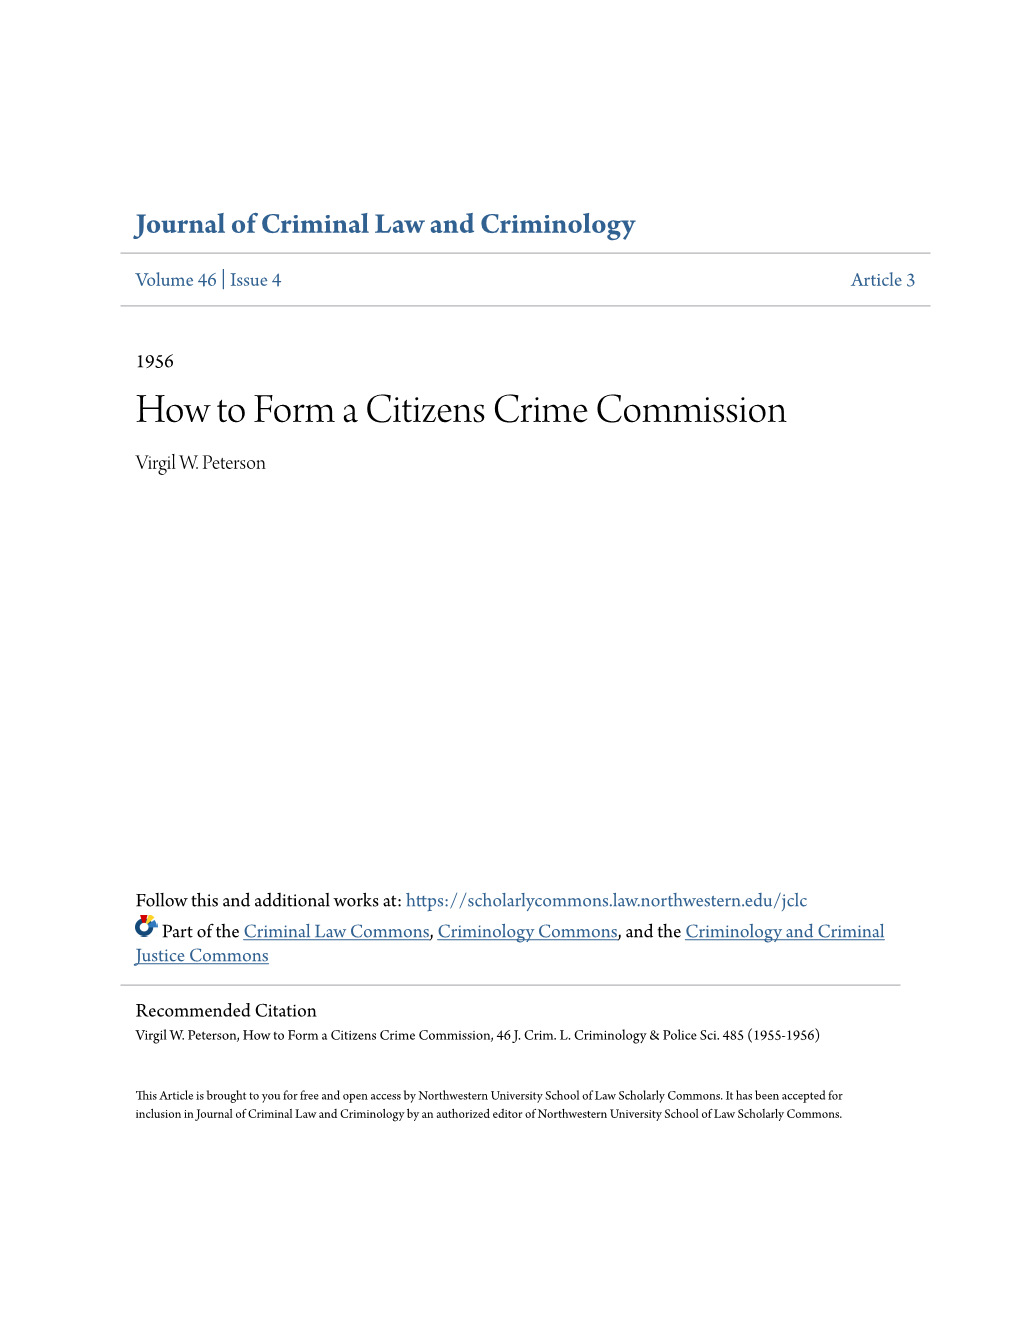 How to Form a Citizens Crime Commission Virgil W